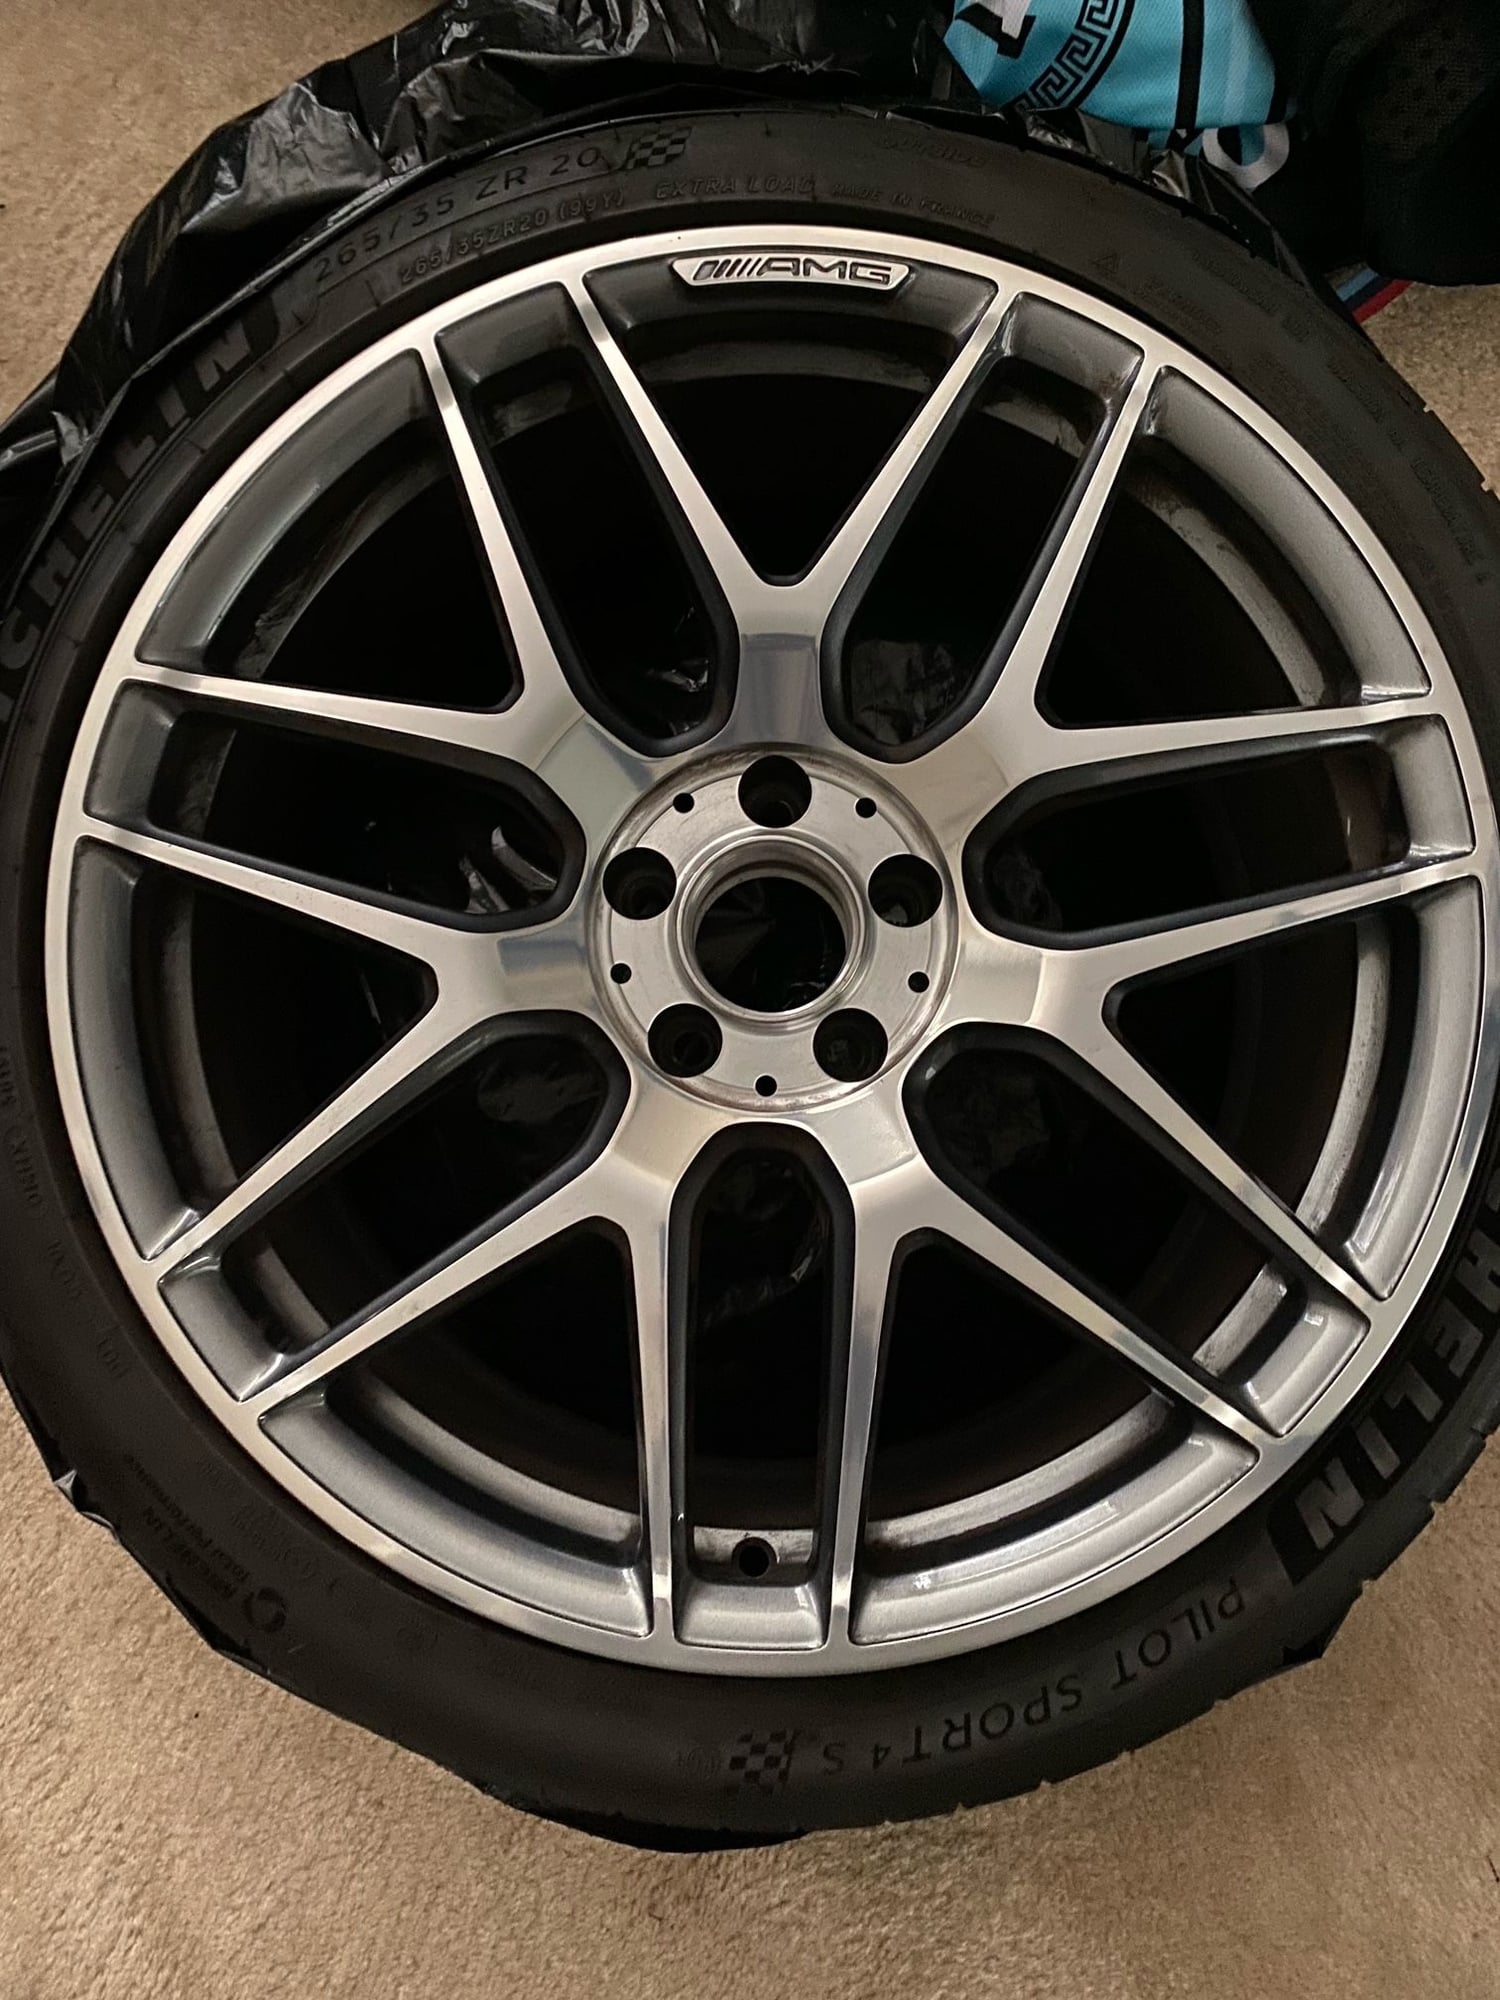 Wheels and Tires/Axles - FS: 2018 E63S 20inch AMG WHEELS/TIRES - Used - 2018 to 2021 Mercedes-Benz E63 AMG S - Schaumburg, IL 60193, United States